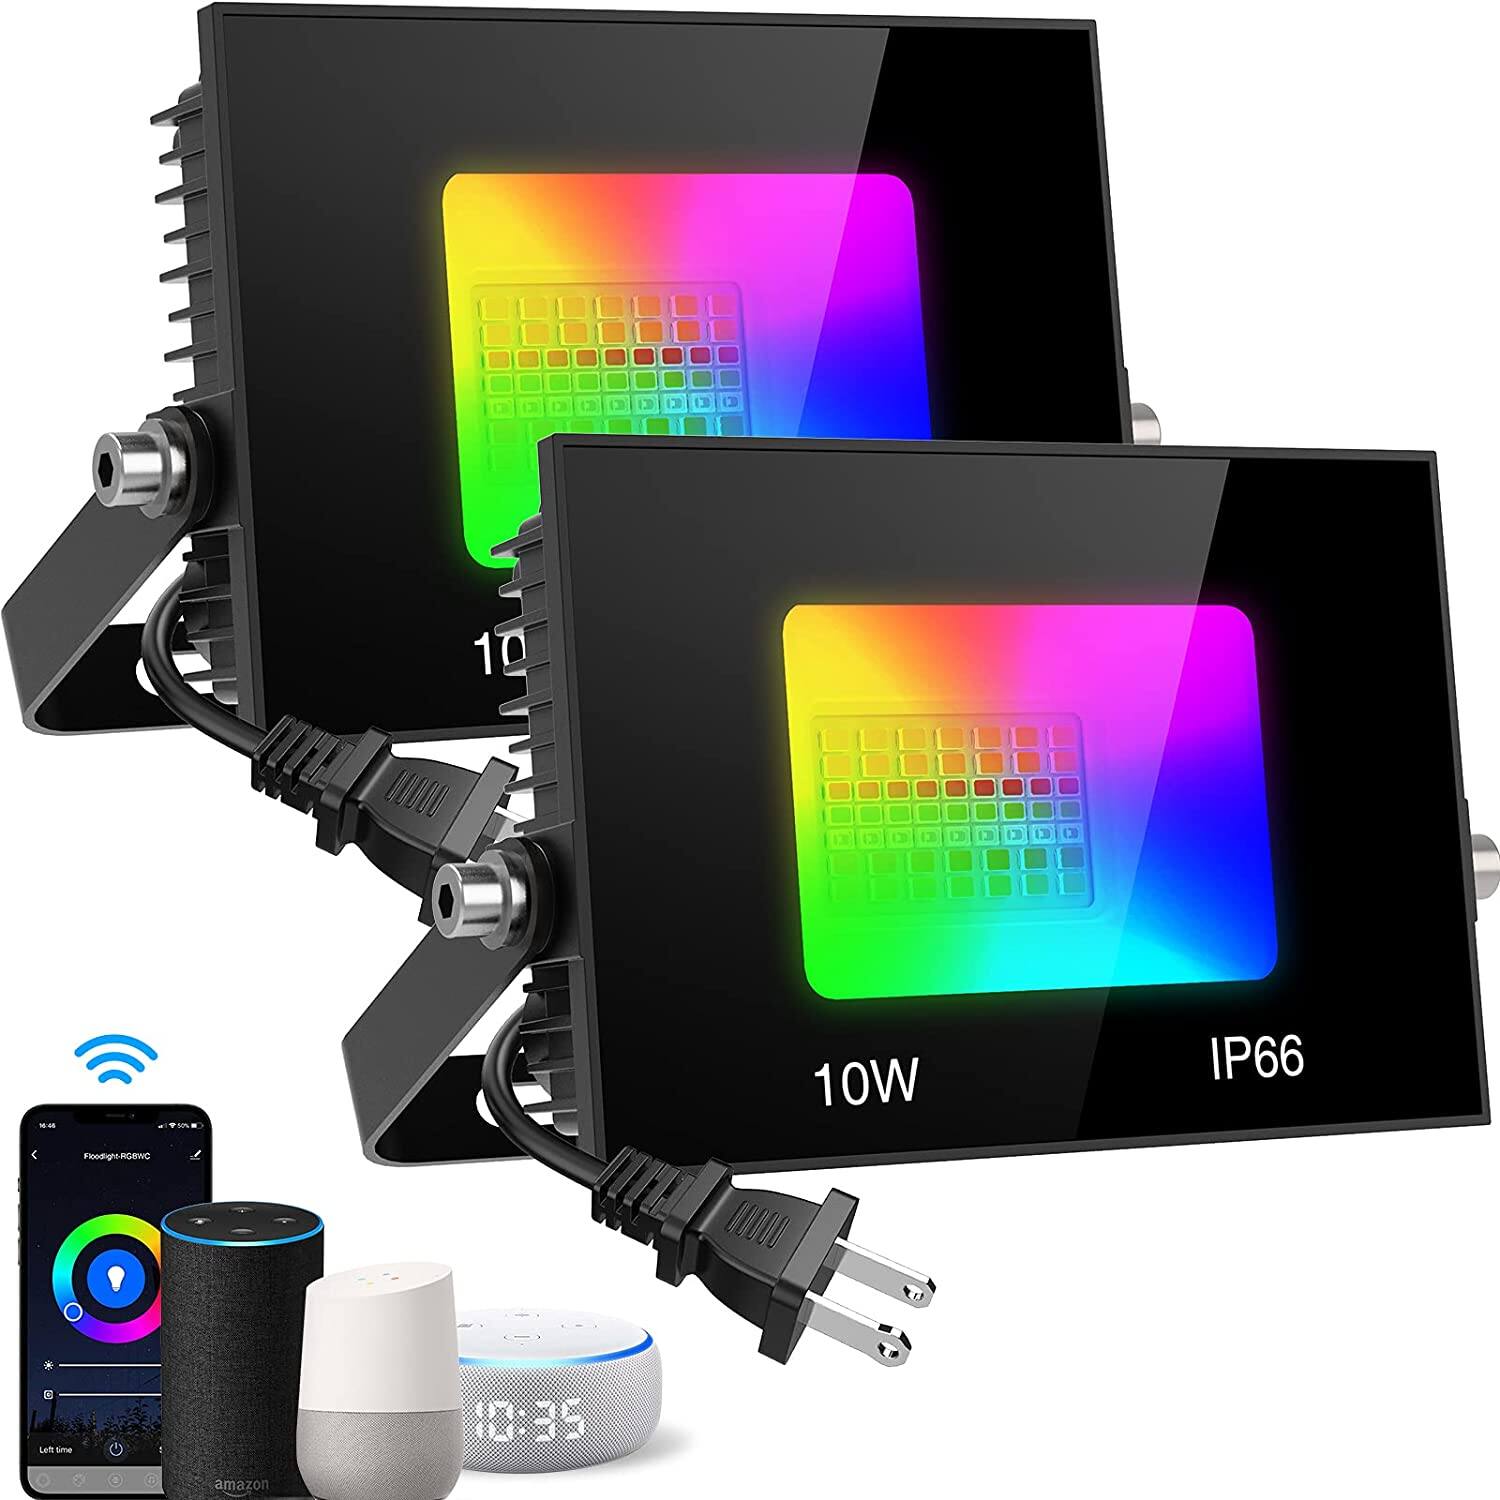 Olafus 2 Pack Smart WiFi RGBCW Flood Lights,10W for $25.19,30W for $32.19,50W for $46.89 +FS with PRIME